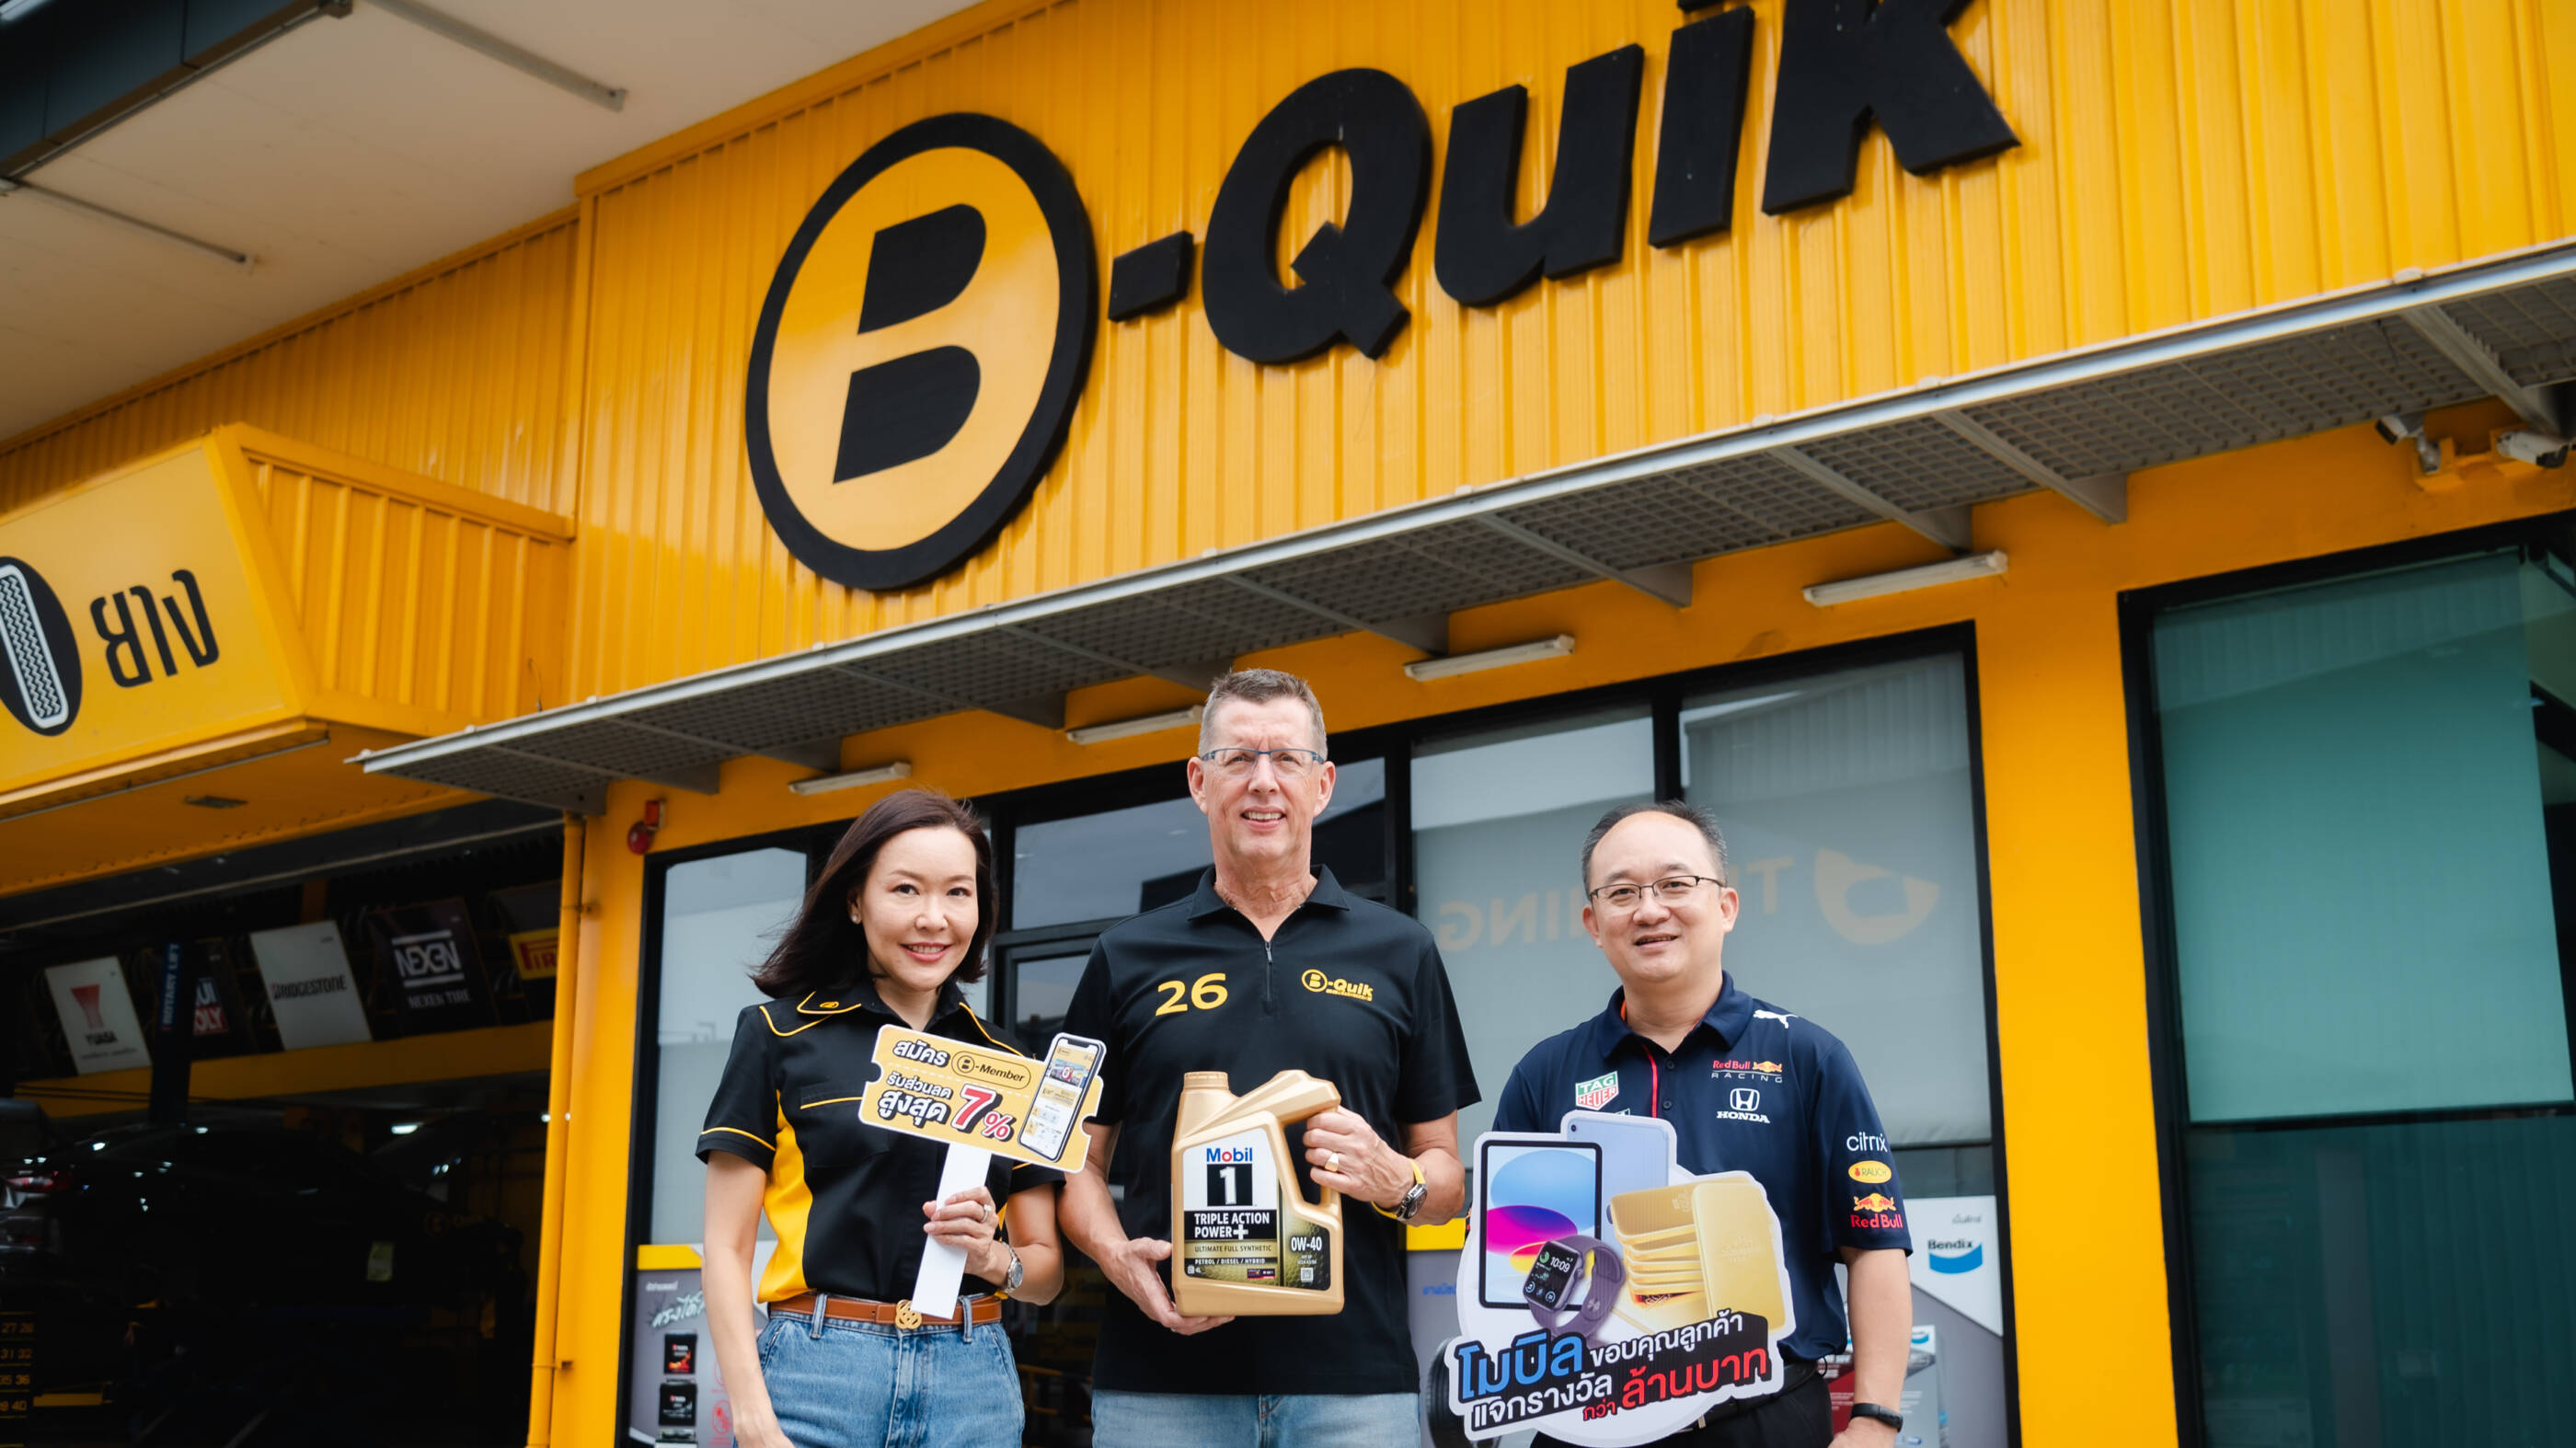 Image Caption: (From left to right) Busararat Assaratanakul, B-Quik chief operating officer; Henk Kiks, B-Quik chief executive officer; Manoch Munjitjuntra, lubricants sales manager.